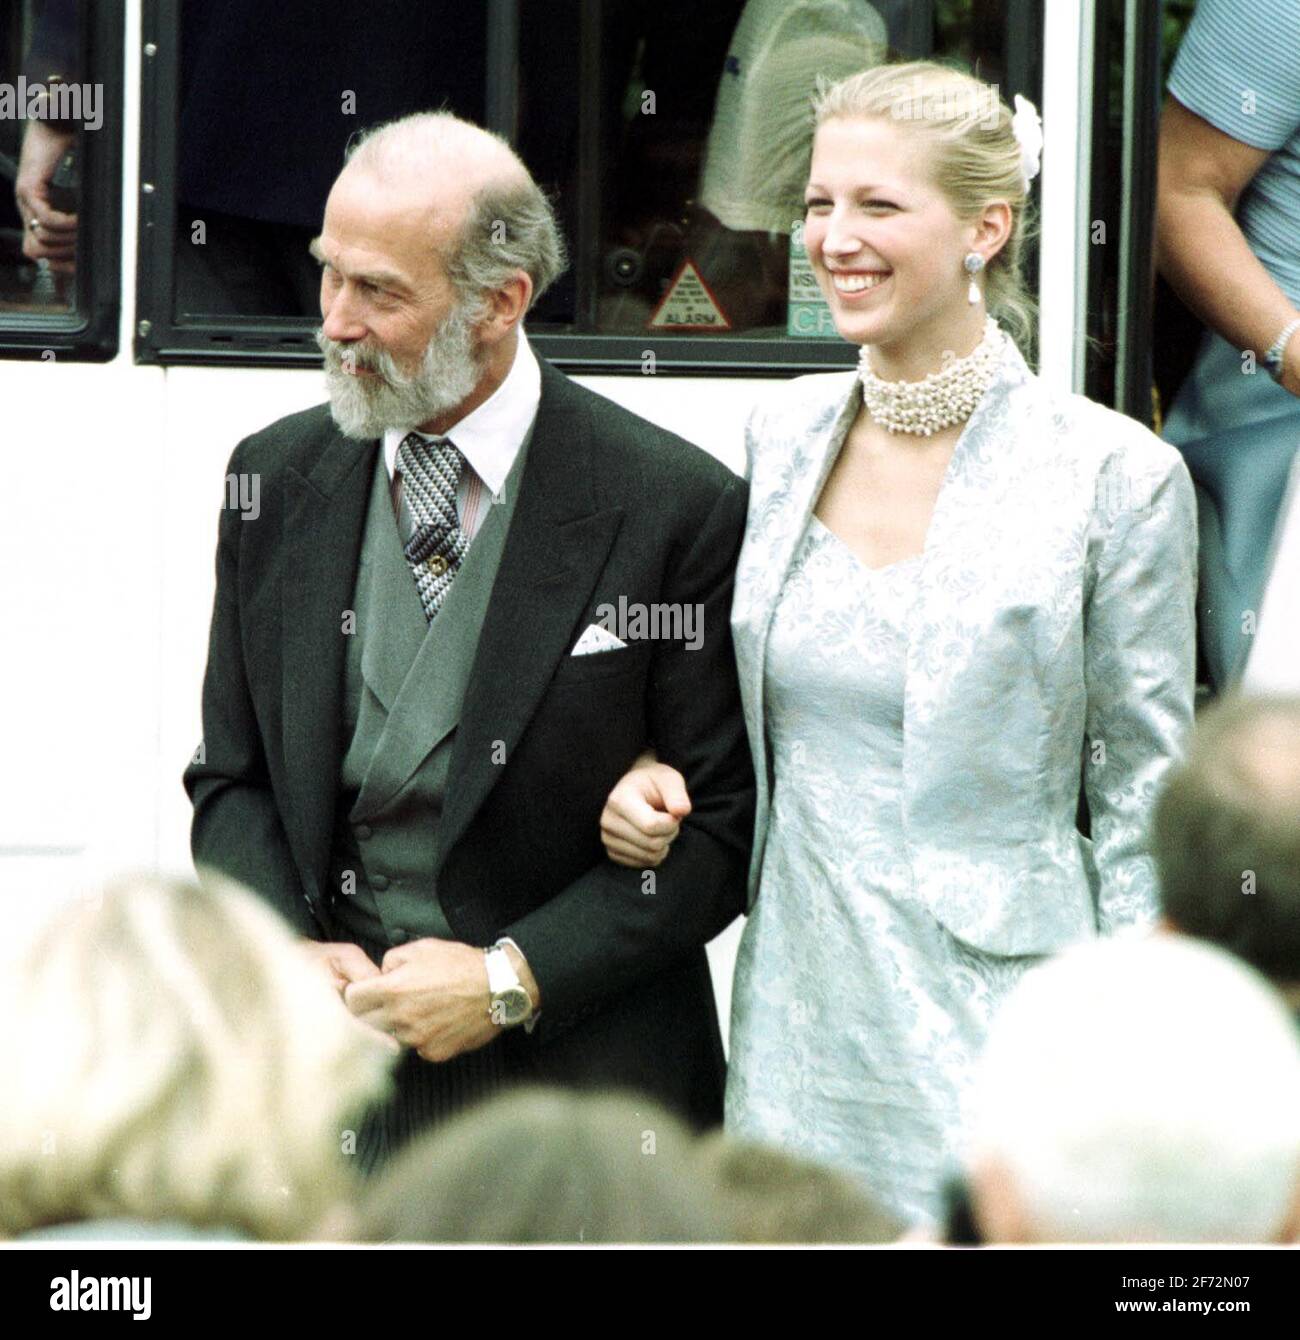 Prince Edward Royal Wedding 1999 Prince Michael of Kent and daughter Lady Gabriella Windsor at the wedding of Edward and Sophie Rhys-Jones at St George's Chapel  Windsor Castle Stock Photo